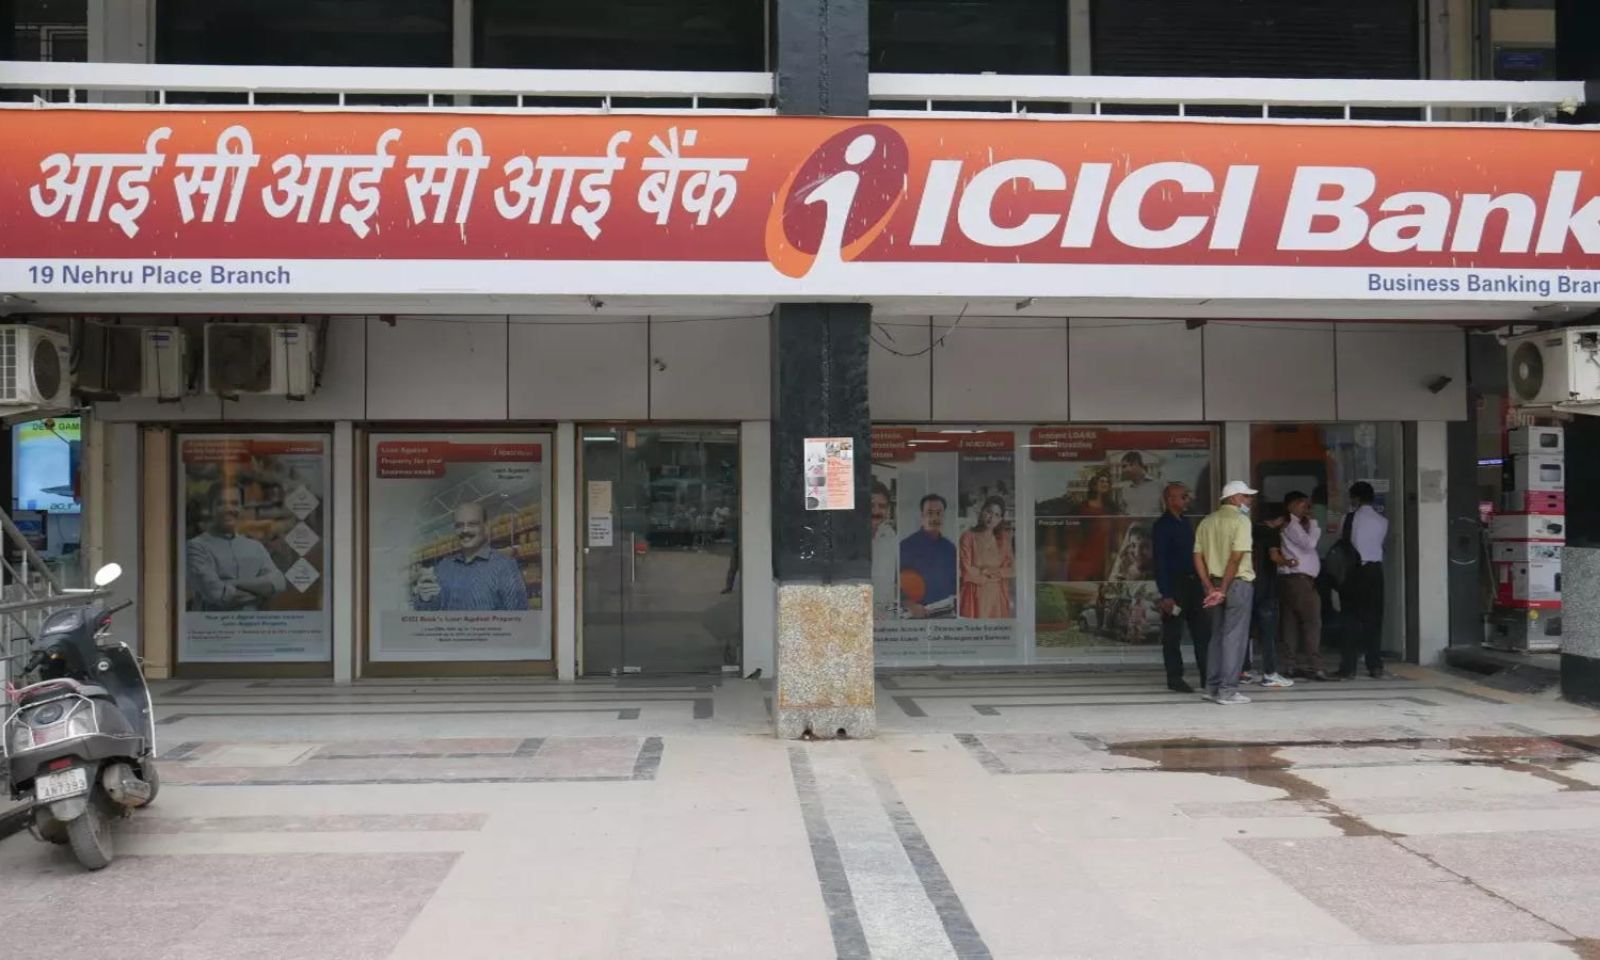 Blackmail, Hush Money, and Fake Accounts: ICICI Bank Branch Manager Caught in Decades-Long Embezzlement Scheme